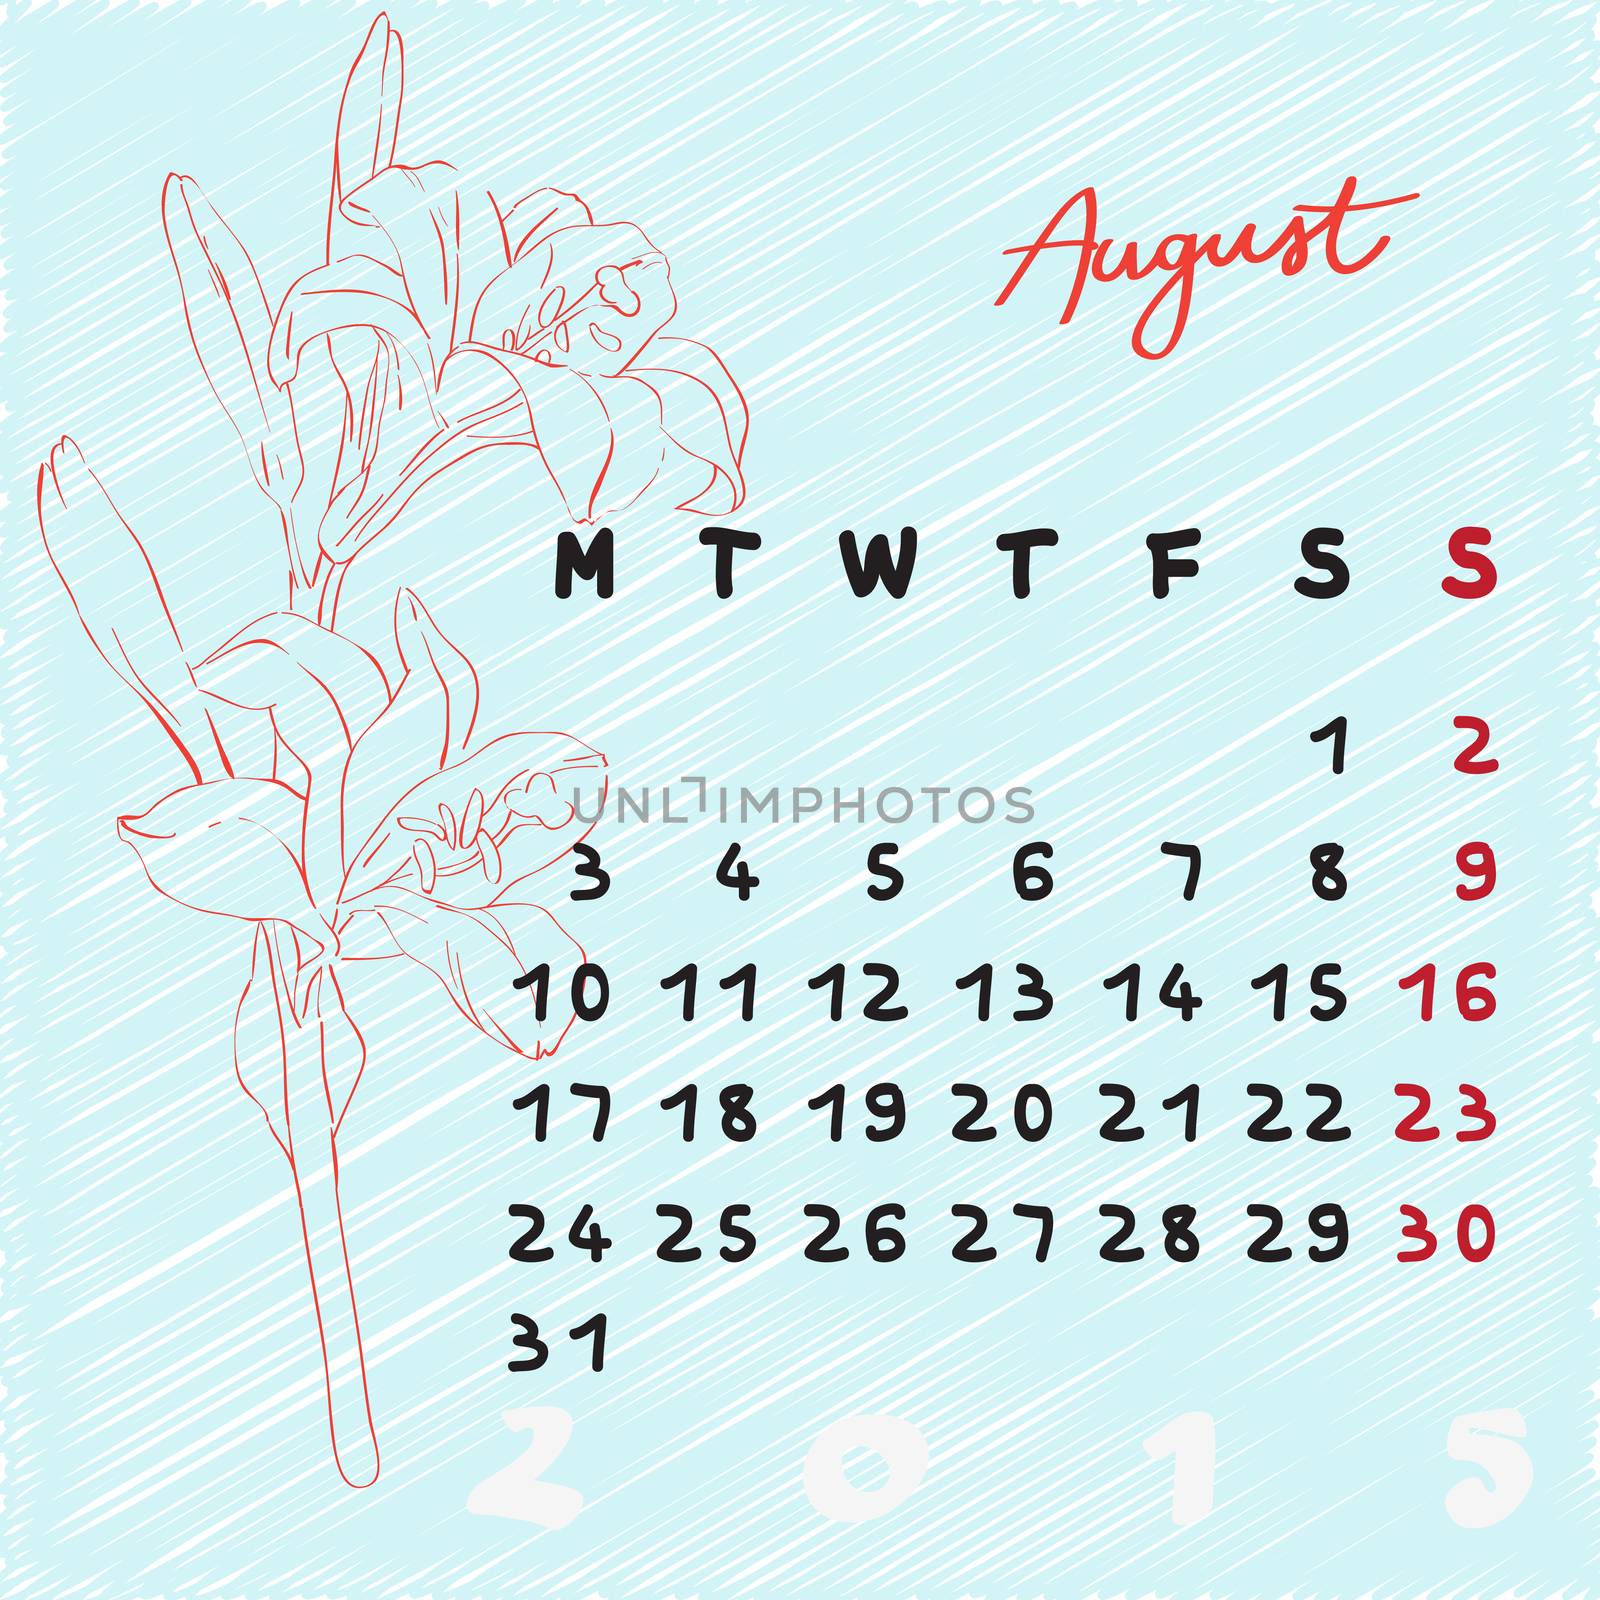 Calendar 2015, graphic illustration of August month calendar with original hand drawn text and lily flower sketch